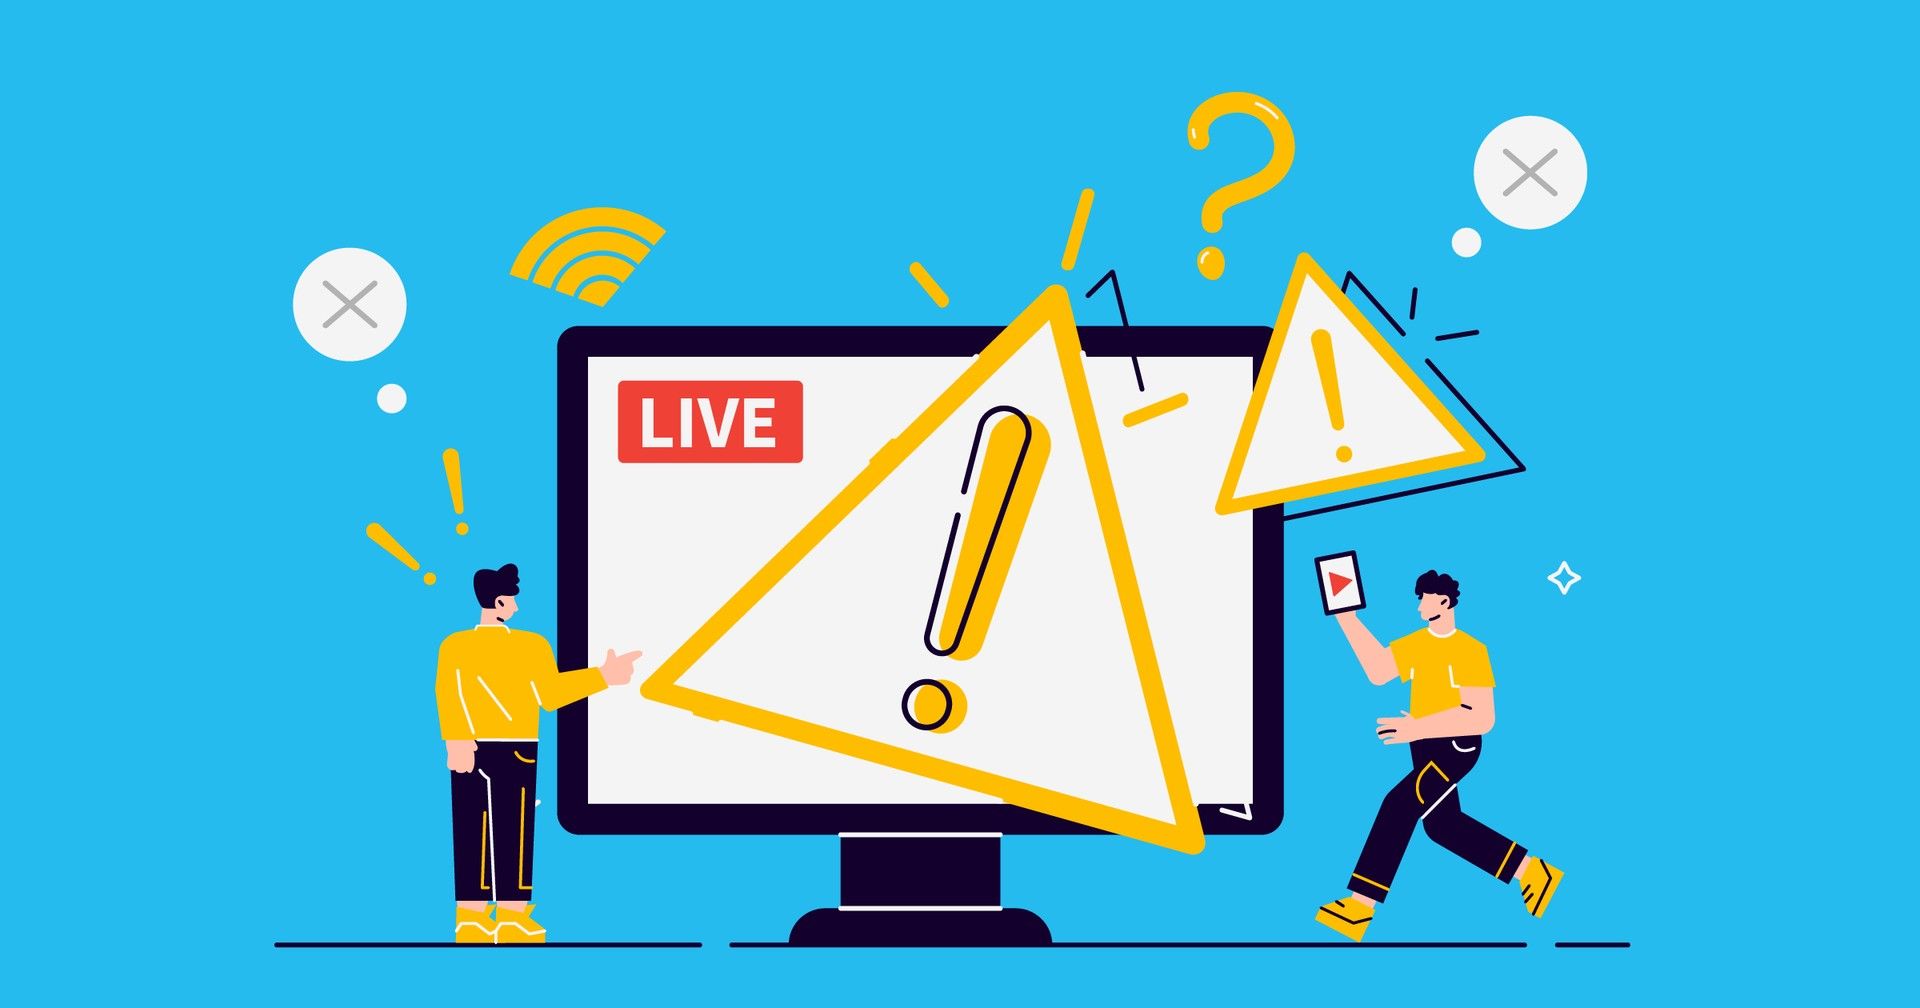 Top 6 live streaming mistakes and how to avoid them